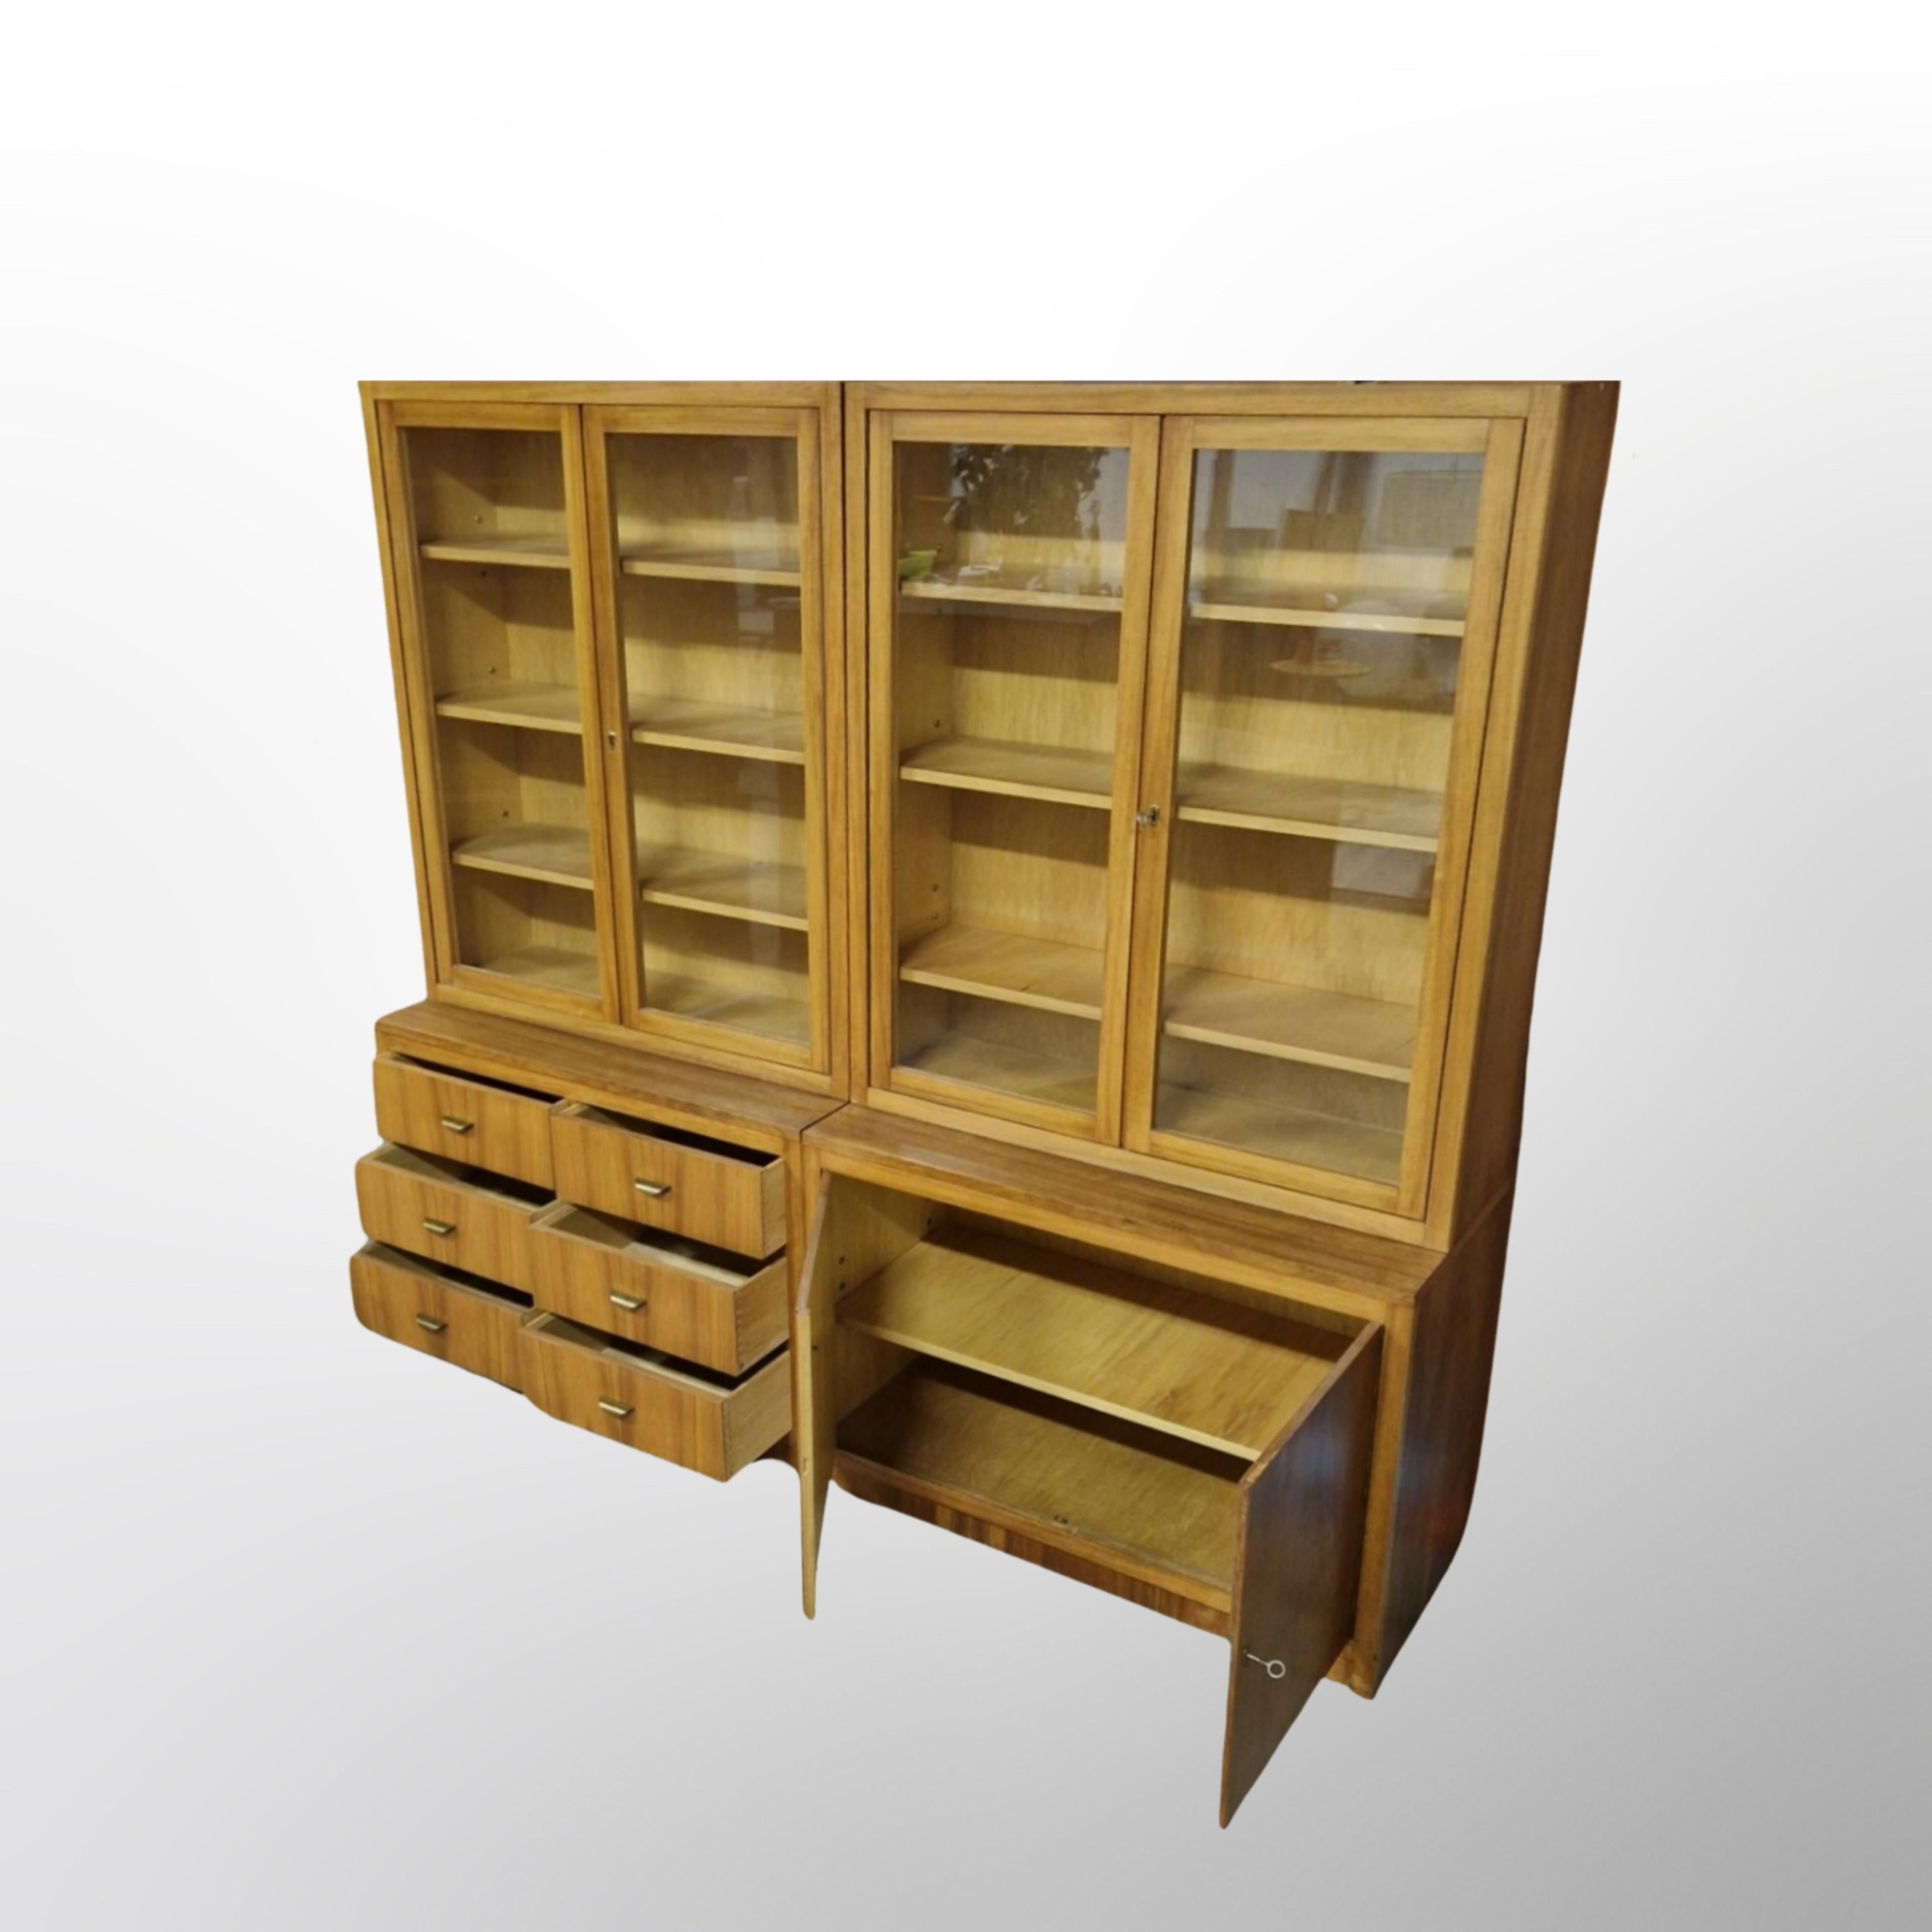 Mid century haberdashery high boards. Made from solid wood and teak veneer. 2 different models. One with drawers and one with doors. We have 2 of each model available. Quality made pieces that were custom made for the first owner by a skilled